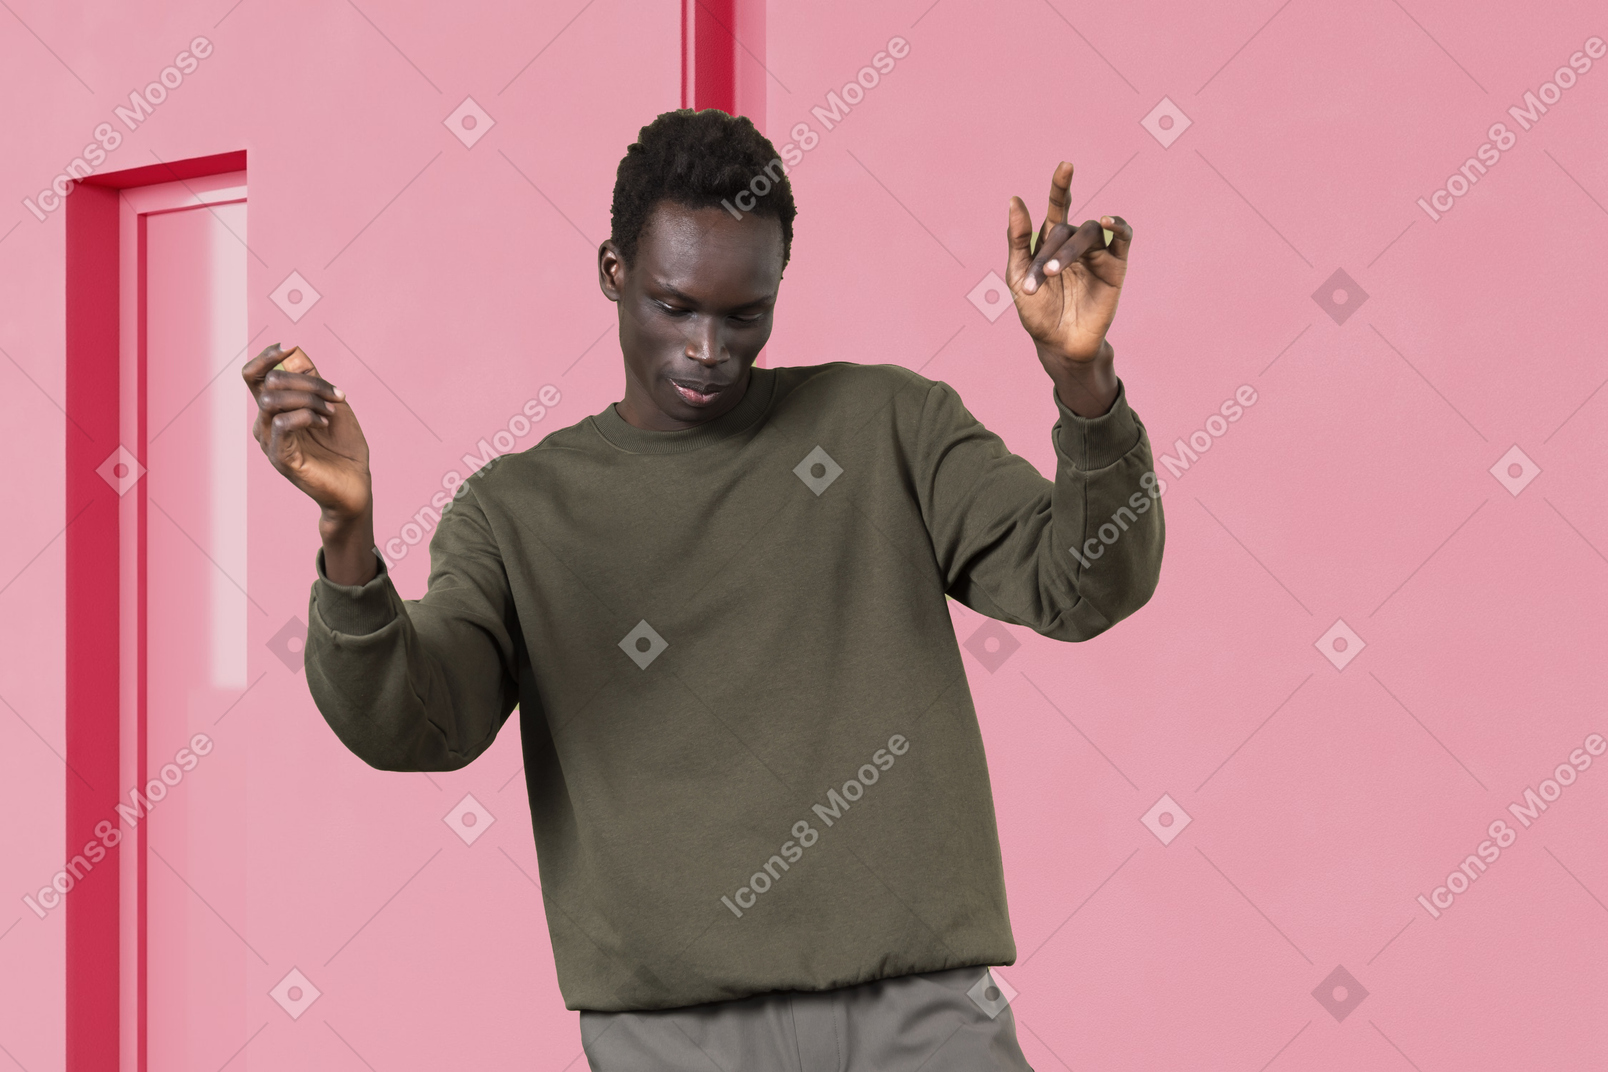 A man dancing in front of a pink wall